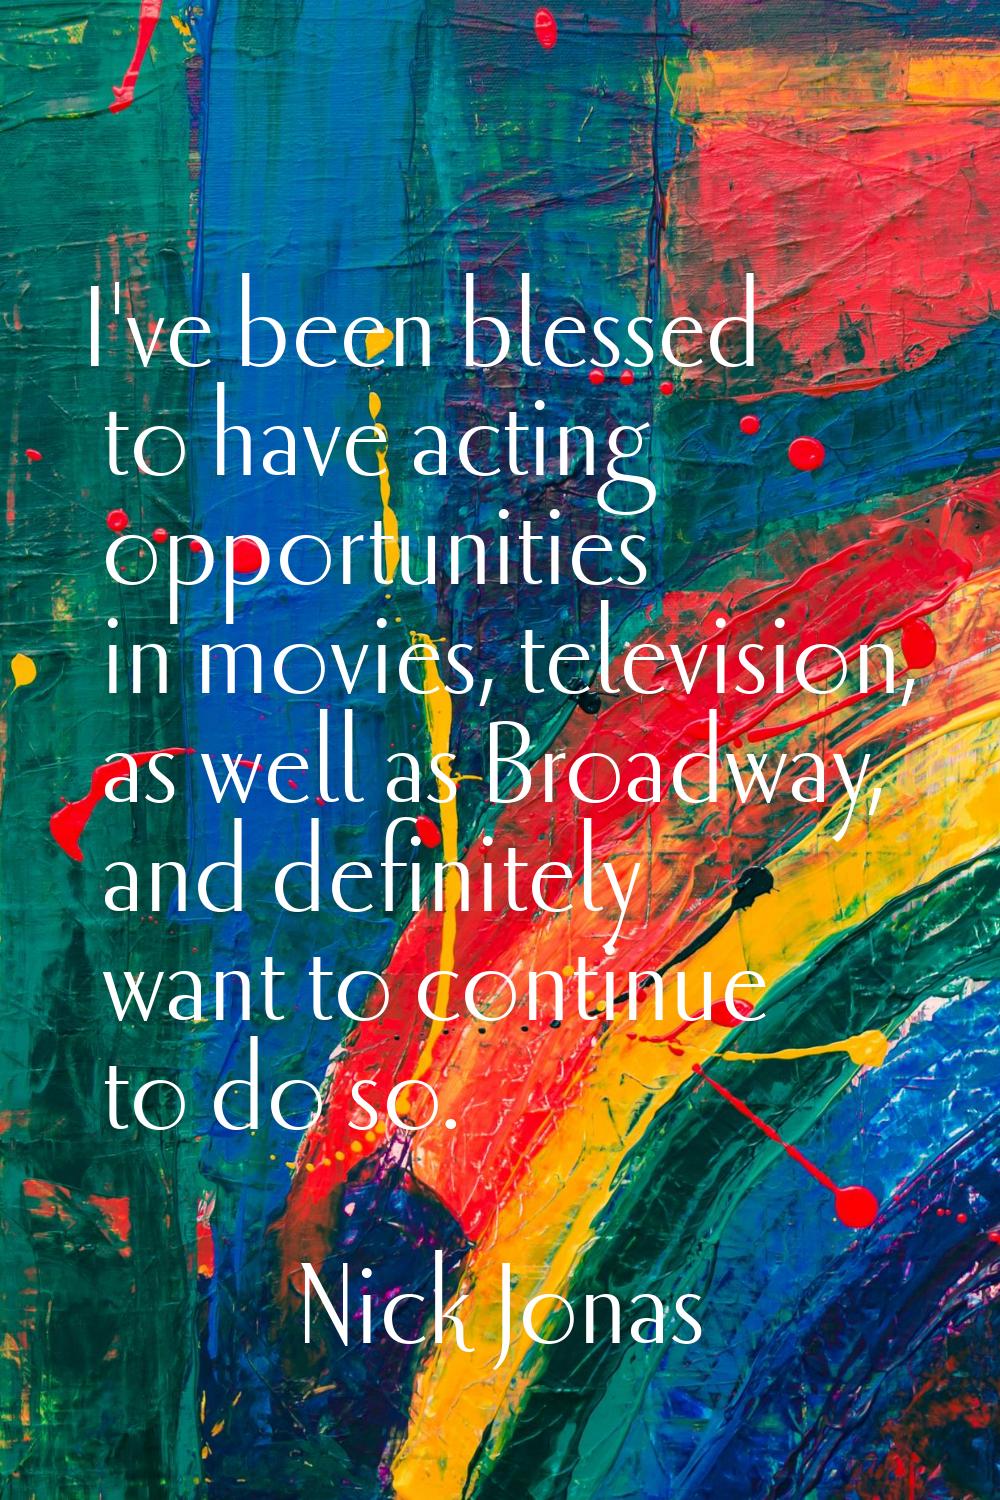 I've been blessed to have acting opportunities in movies, television, as well as Broadway, and defi